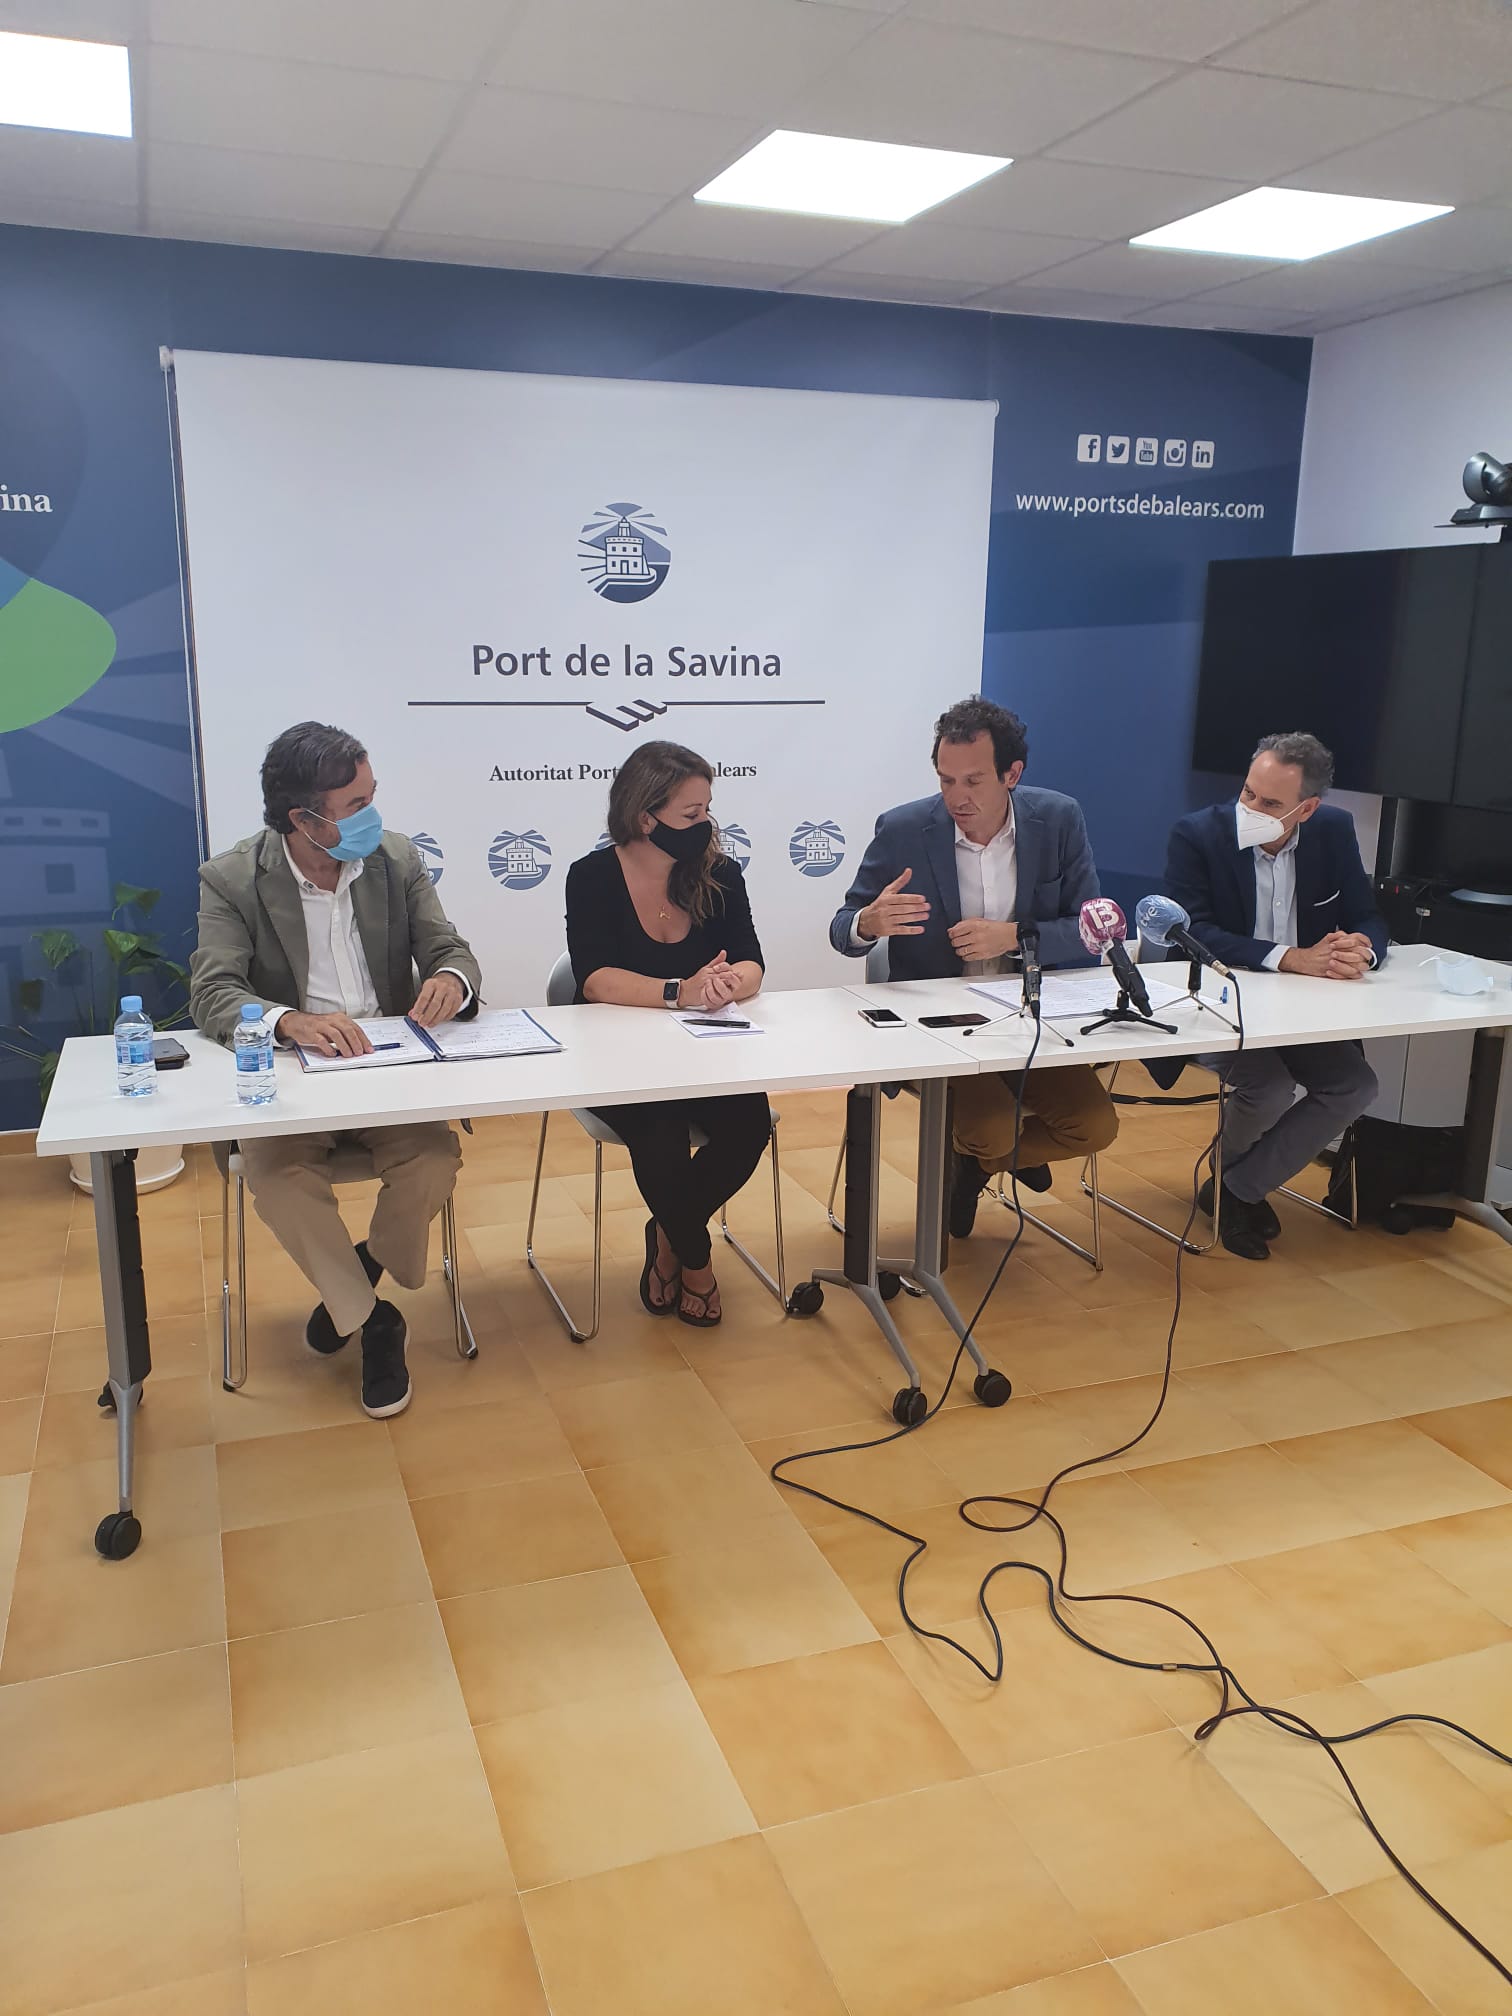 The Balearic Islands Government, the Formentera Island Council and the APB announce a reduction in port calls at the Port of La Savina for environmental, safety and service optimisation reasons